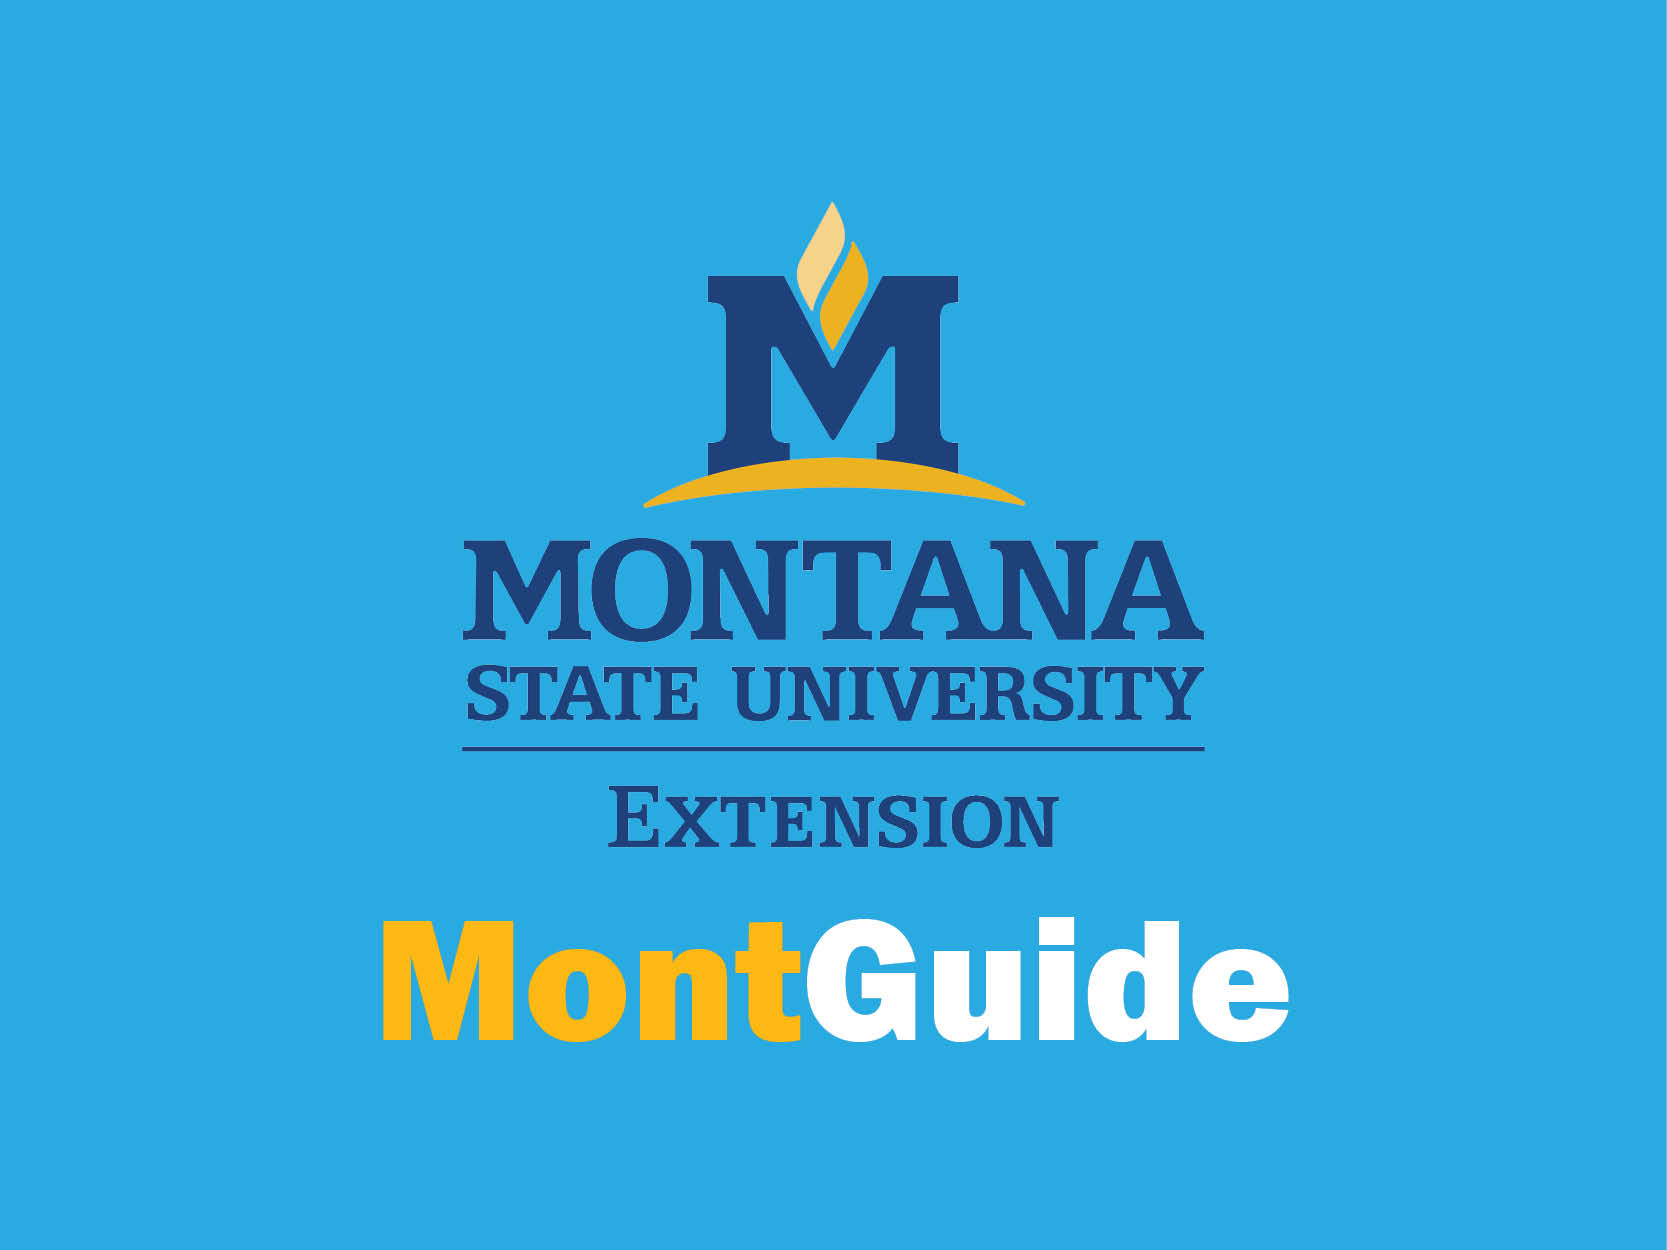 A logo of Montana State University Extension MontGuide